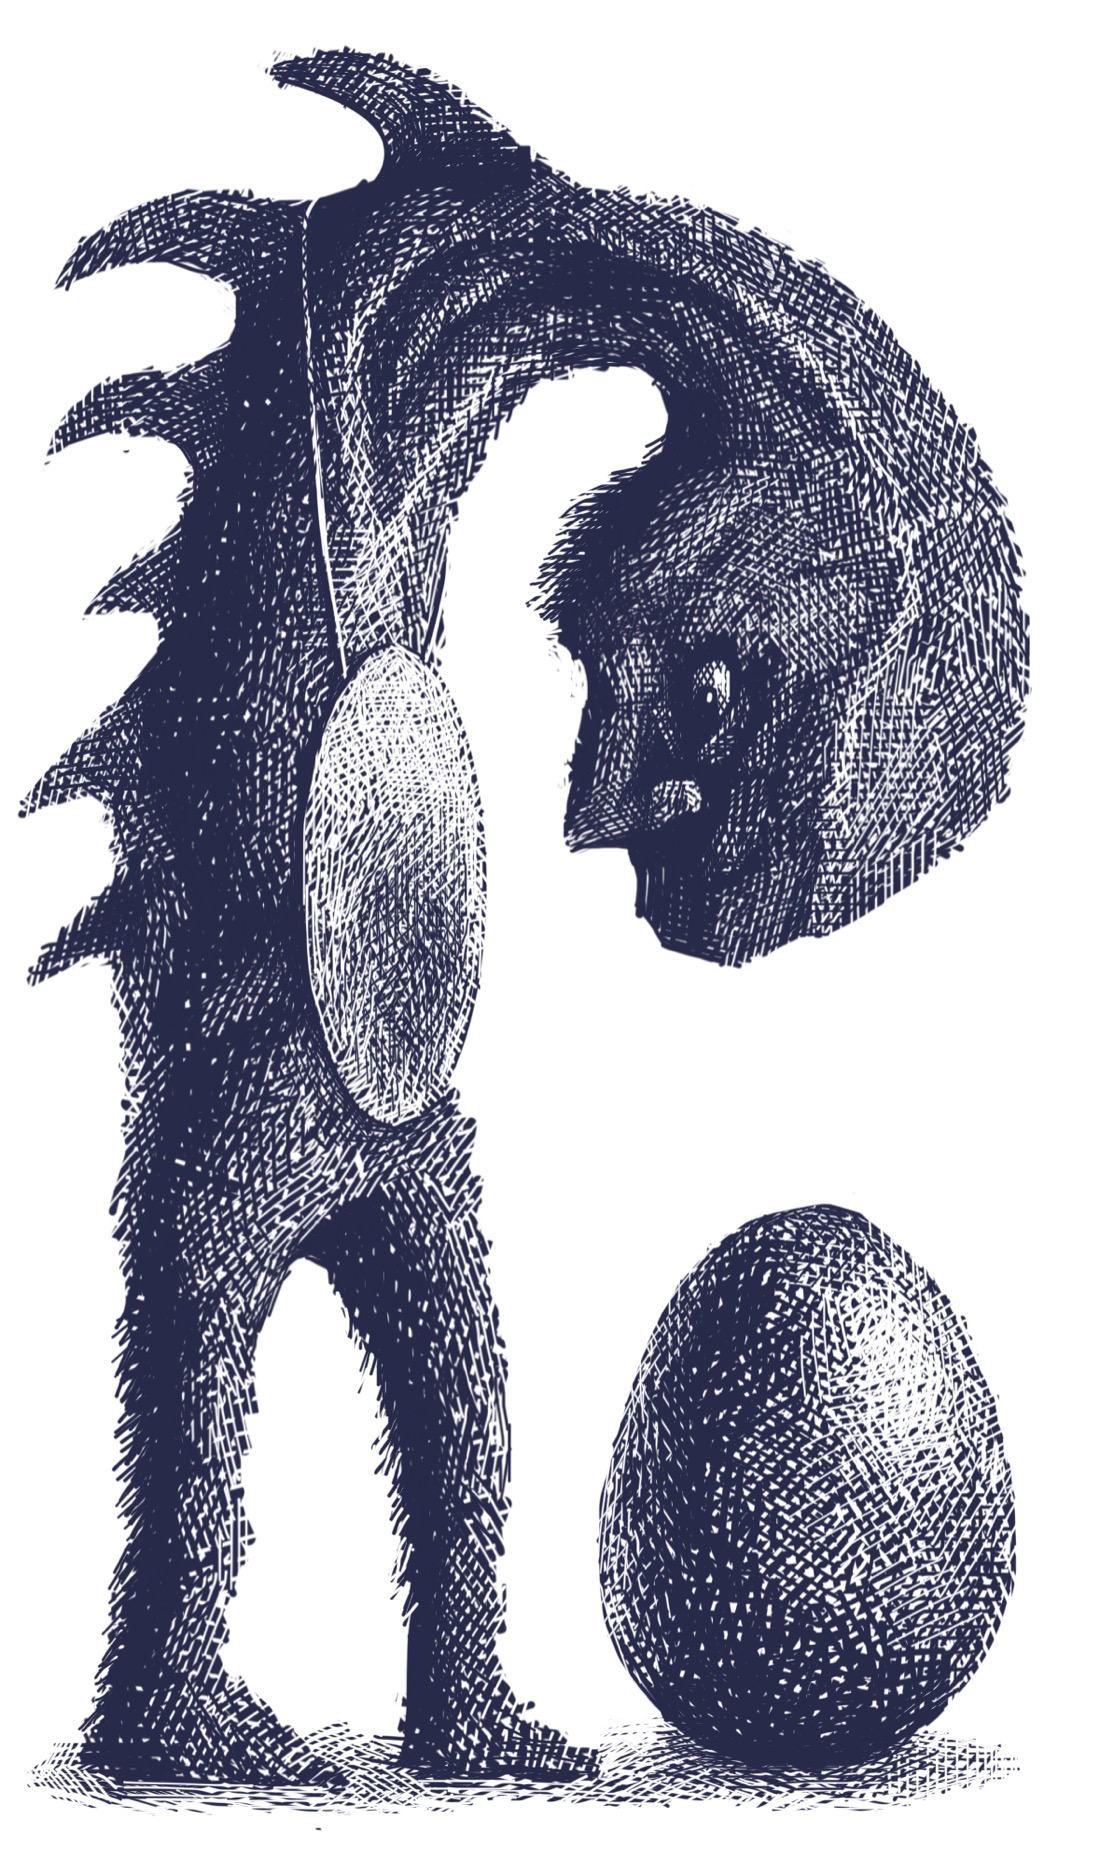 A tall, two-legged figure with no arms and fin-shaped spikes running down its back. The figure has a long neck, and the neck is curved around so its head is looking directly at its chest. However, the neck is coming out of the top of the creature's head, not below its jaw, as would be the case for a person. The creature has a large, circular mirror hung around its neck like a medallion, and it is inspecting its reflection. Placed in front of it is a very large black egg. The whole scene is rendered in fine-lined black-and-white.